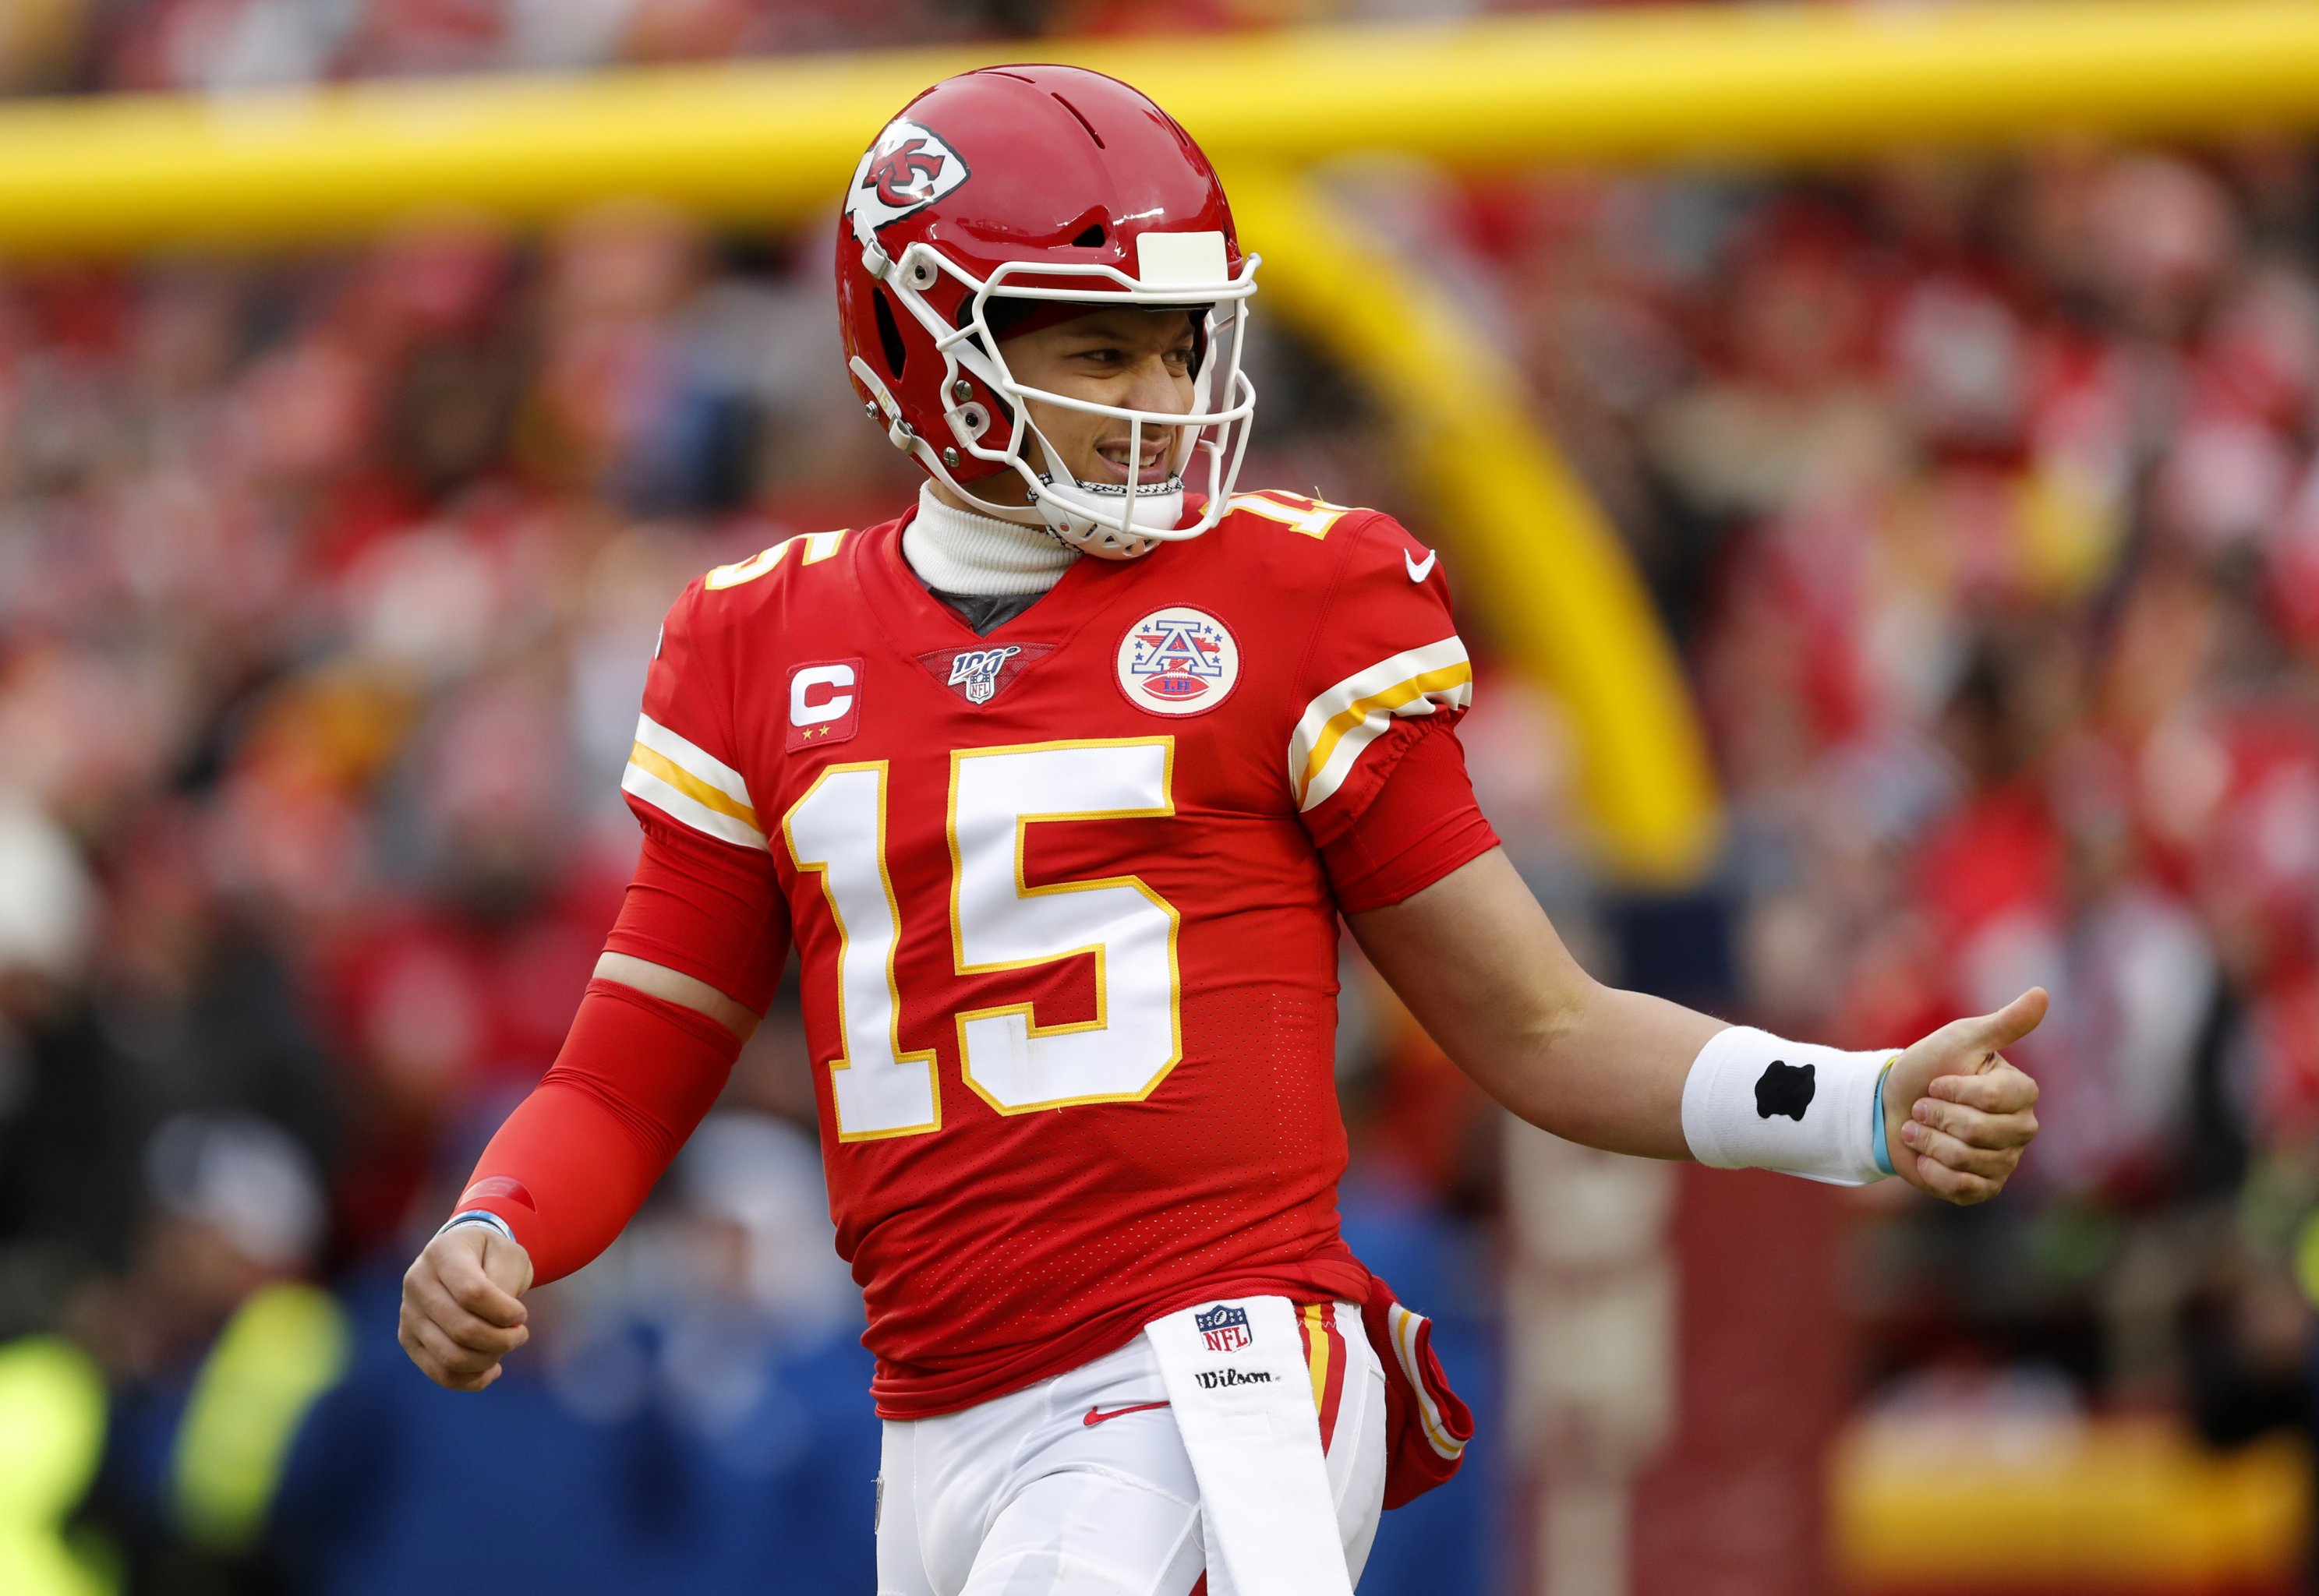 Travis Kelce takes shot at Dee Ford during Chiefs' Super Bowl rally